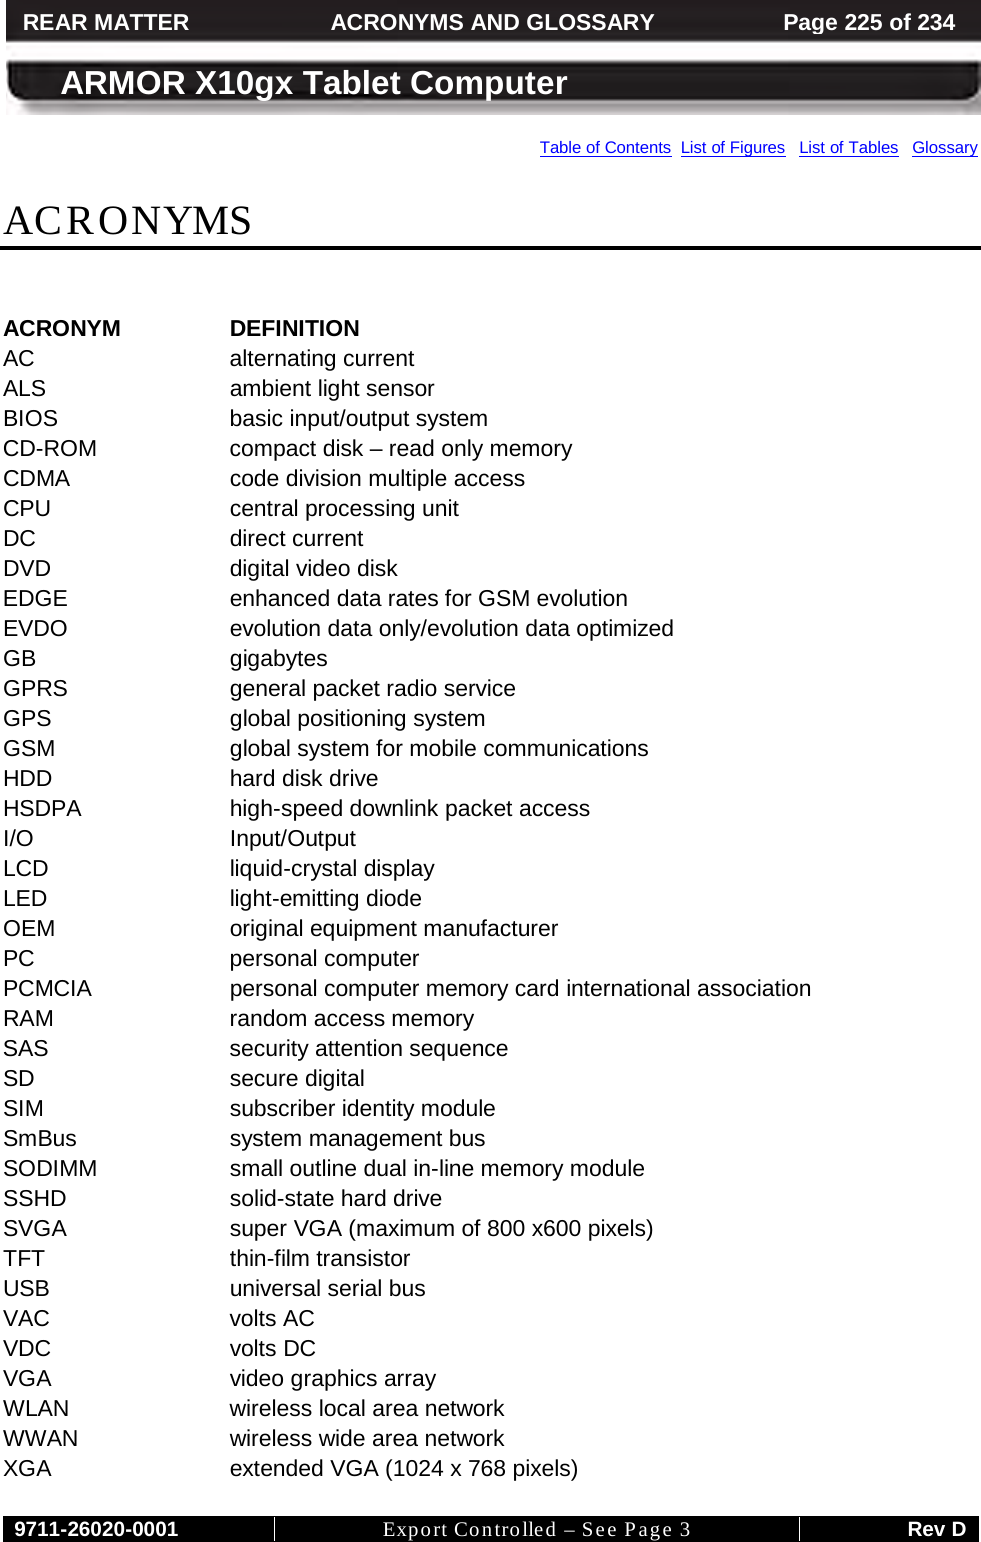     9711-26020-0001 Export Controlled – See Page 3 Rev D REAR MATTER ACRONYMS AND GLOSSARY Page 225 of 234  ARMOR X10gx Tablet Computer Table of Contents  List of Figures   List of Tables   Glossary ACRONYMS  ACRONYM DEFINITION AC alternating current ALS ambient light sensor BIOS basic input/output system CD-ROM compact disk – read only memory CDMA code division multiple access CPU central processing unit DC direct current DVD digital video disk EDGE enhanced data rates for GSM evolution EVDO evolution data only/evolution data optimized GB gigabytes GPRS general packet radio service GPS global positioning system GSM global system for mobile communications HDD hard disk drive HSDPA high-speed downlink packet access I/O Input/Output LCD liquid-crystal display LED light-emitting diode OEM original equipment manufacturer PC personal computer PCMCIA personal computer memory card international association RAM random access memory SAS security attention sequence SD secure digital SIM subscriber identity module SmBus system management bus SODIMM small outline dual in-line memory module SSHD solid-state hard drive SVGA super VGA (maximum of 800 x600 pixels) TFT thin-film transistor USB universal serial bus VAC volts AC VDC volts DC VGA video graphics array WLAN wireless local area network WWAN wireless wide area network XGA extended VGA (1024 x 768 pixels) 